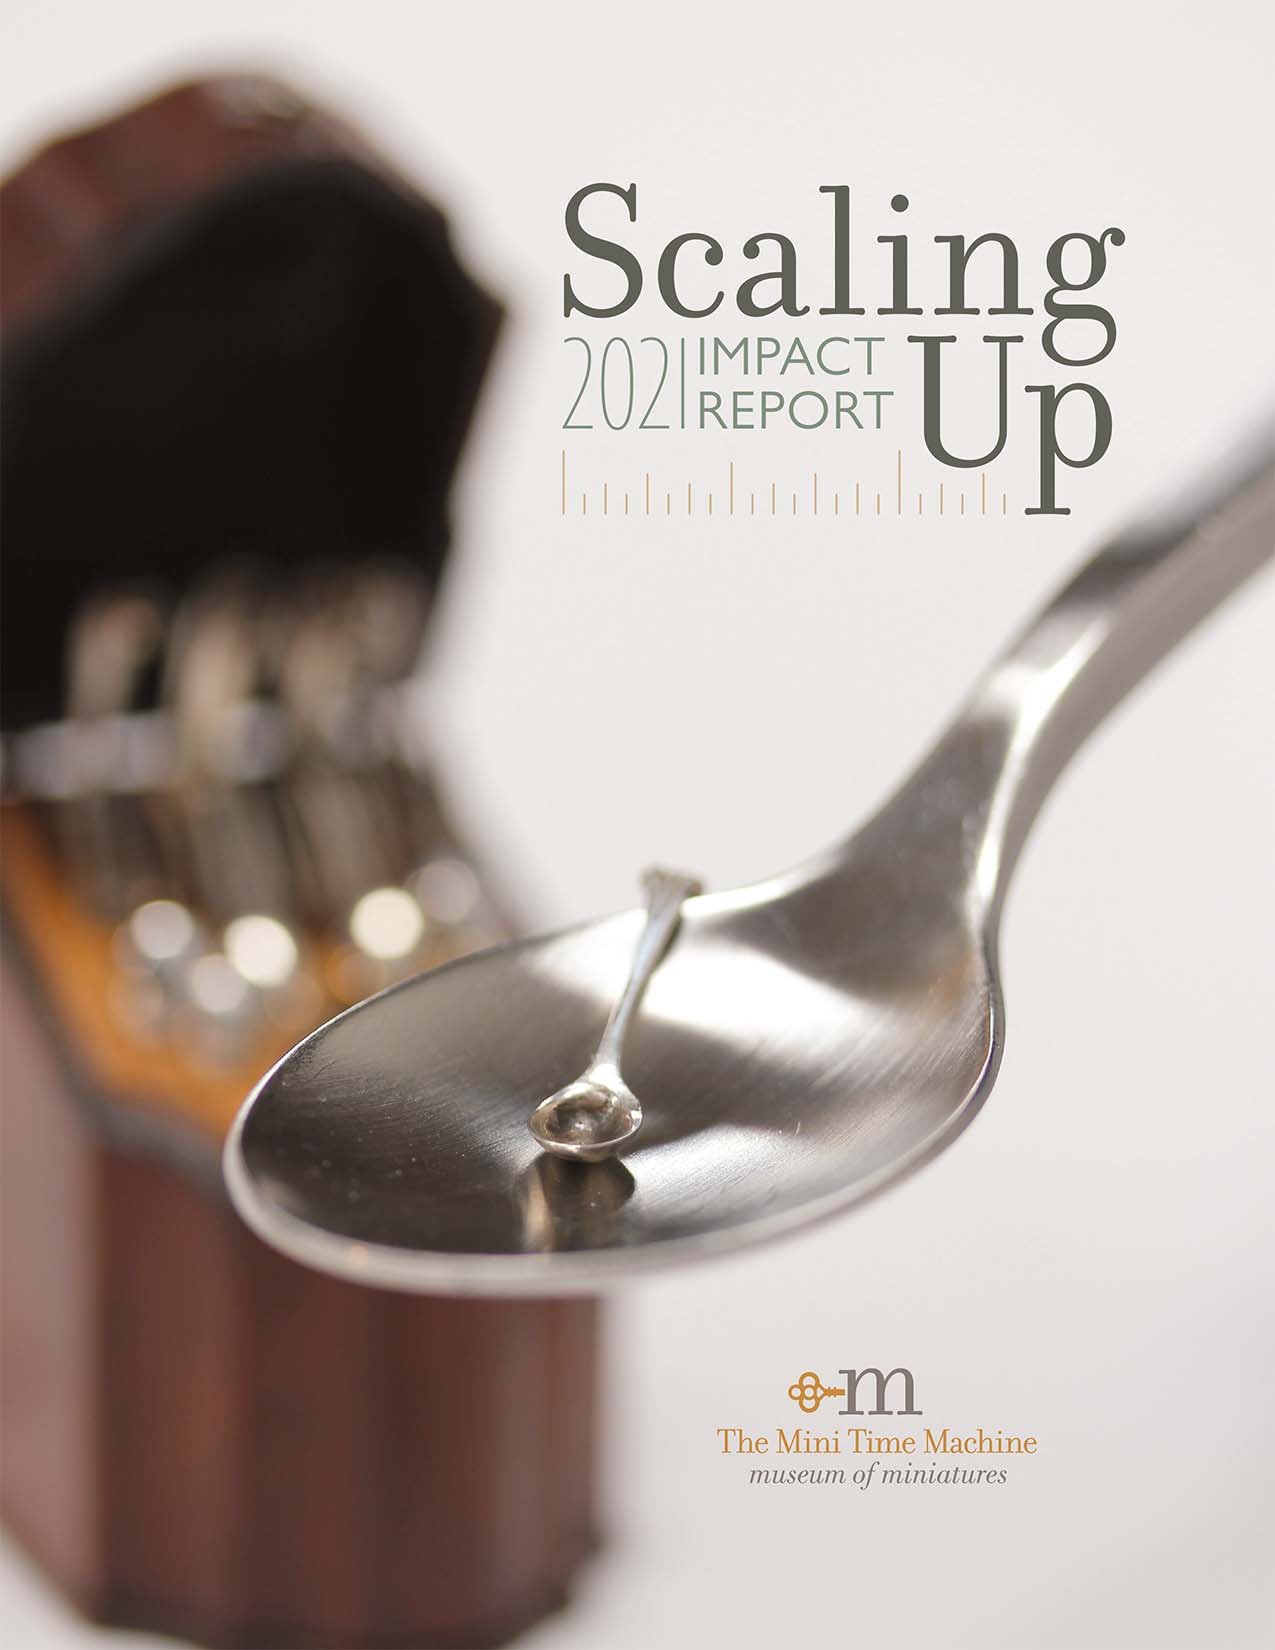 2021 Impact Report Cover - "Scaling Up!"